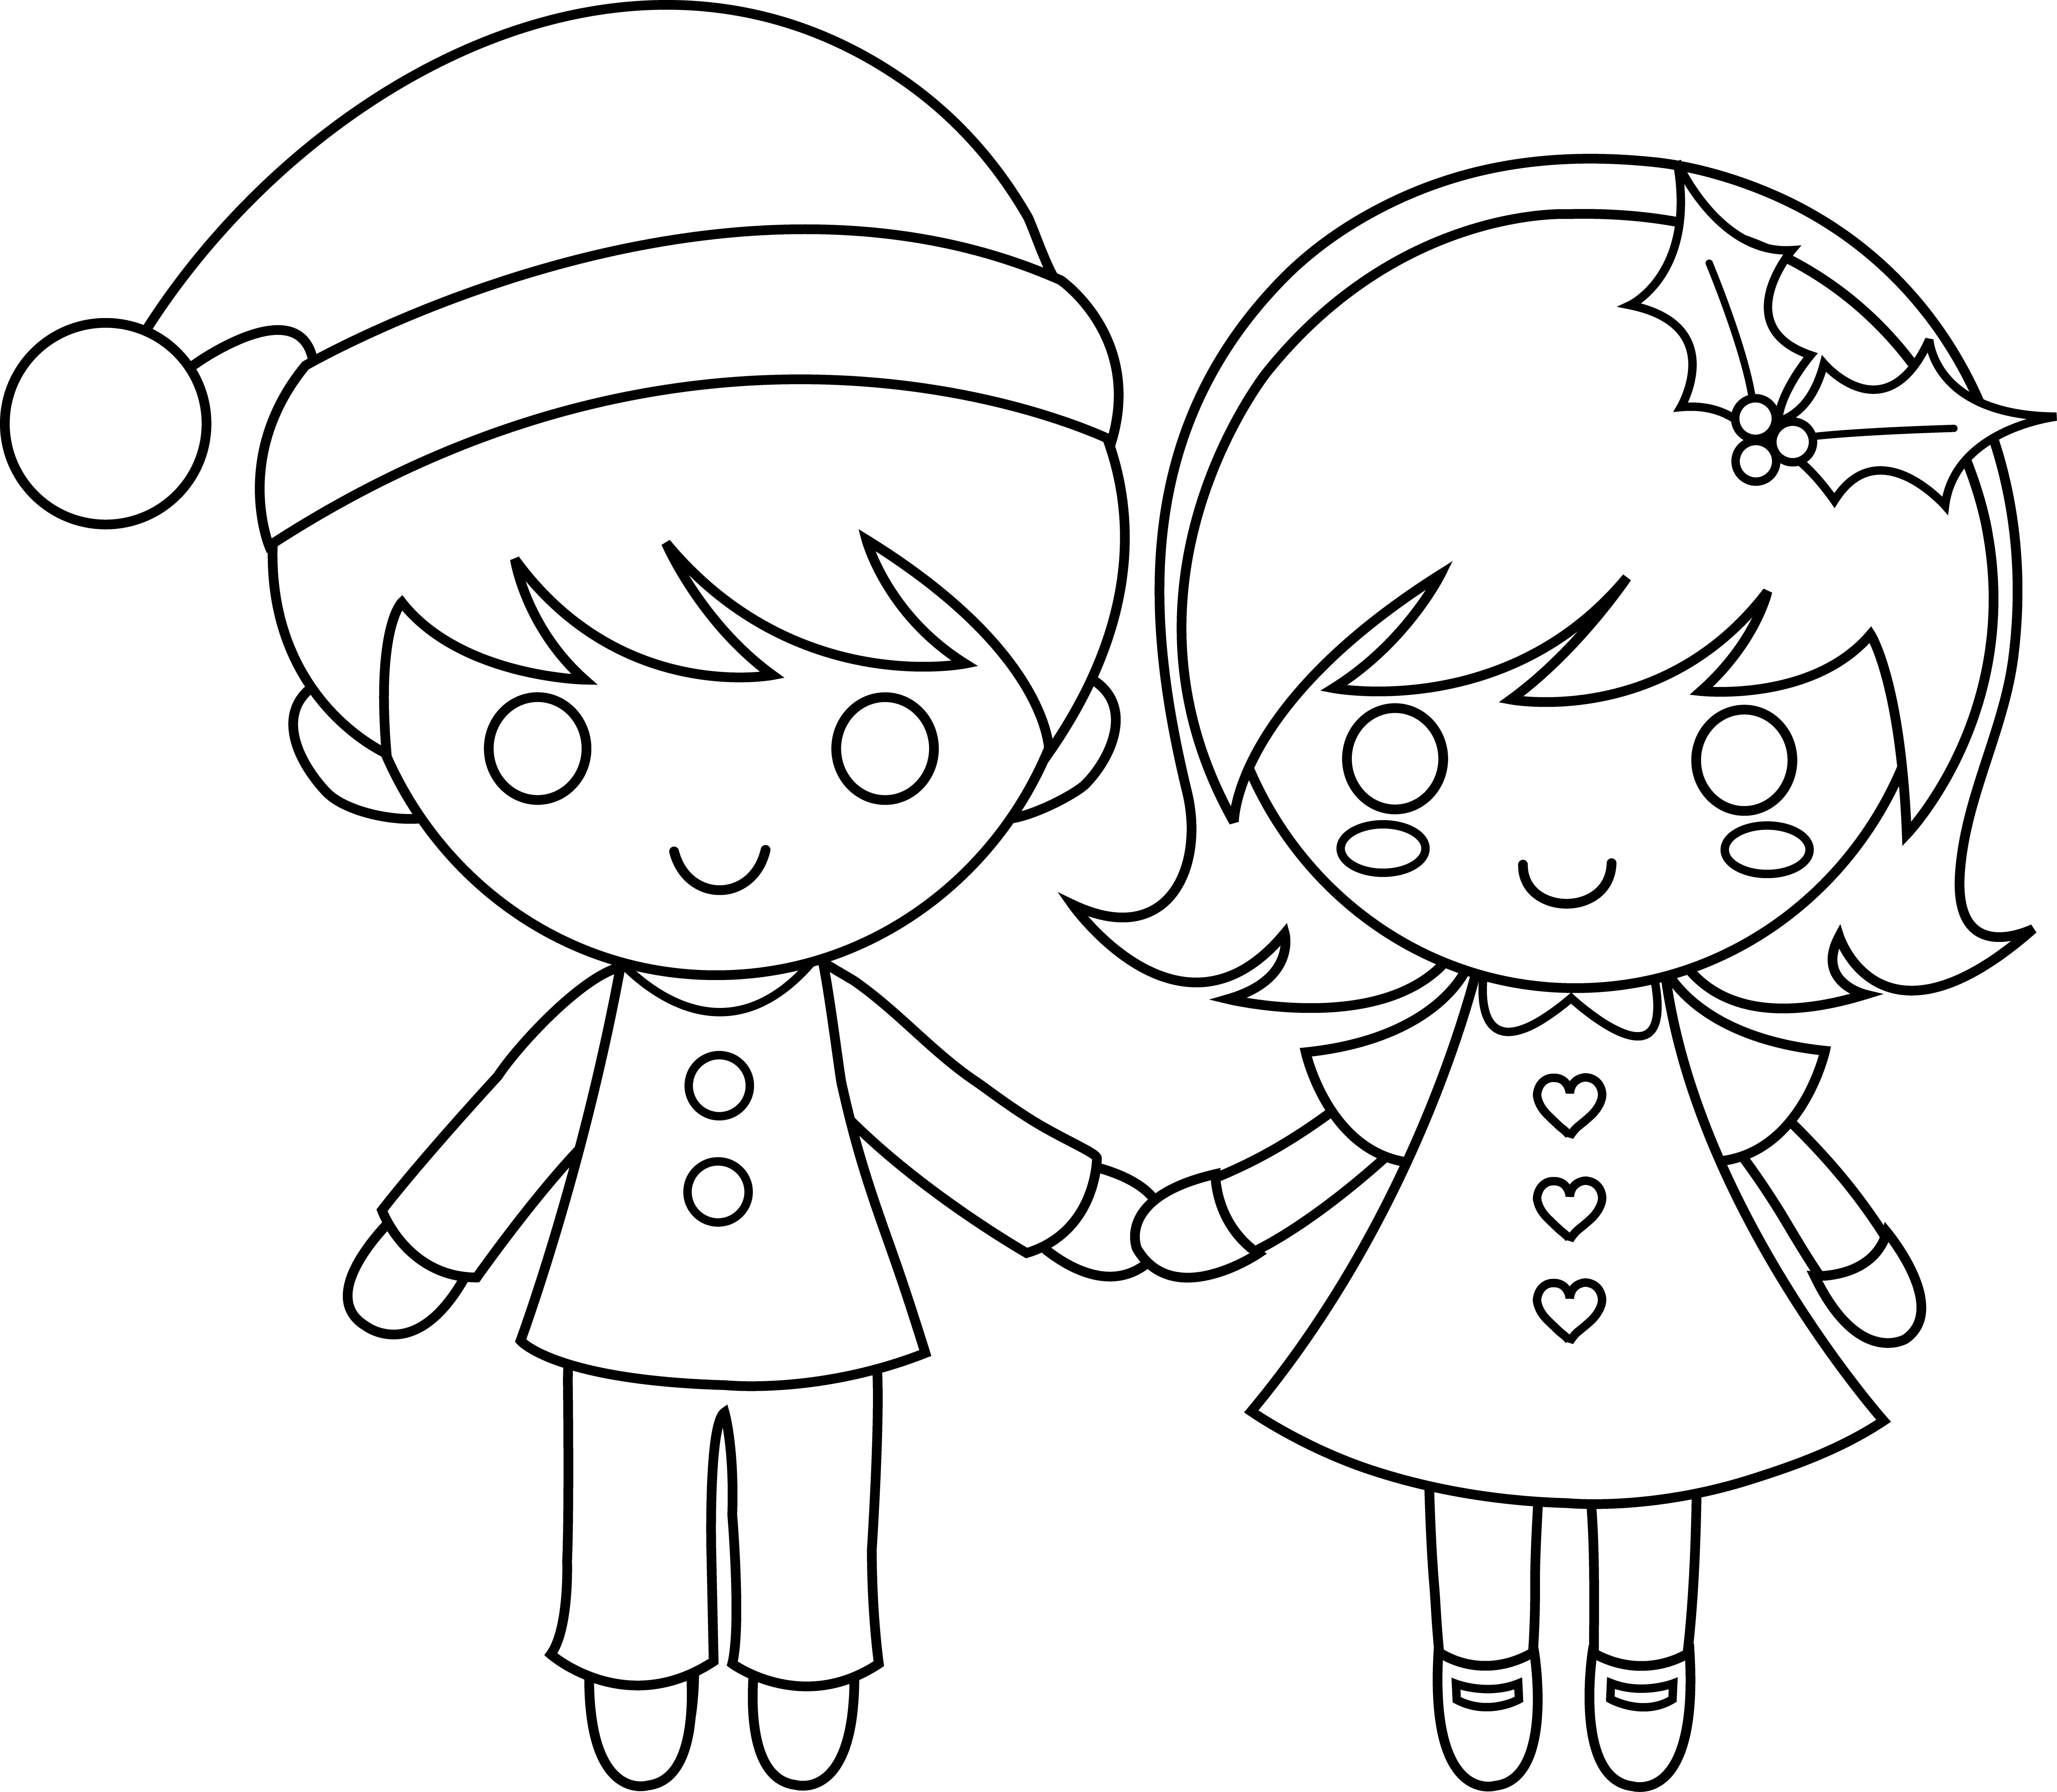 Clipart person easy. Christmas kids line art